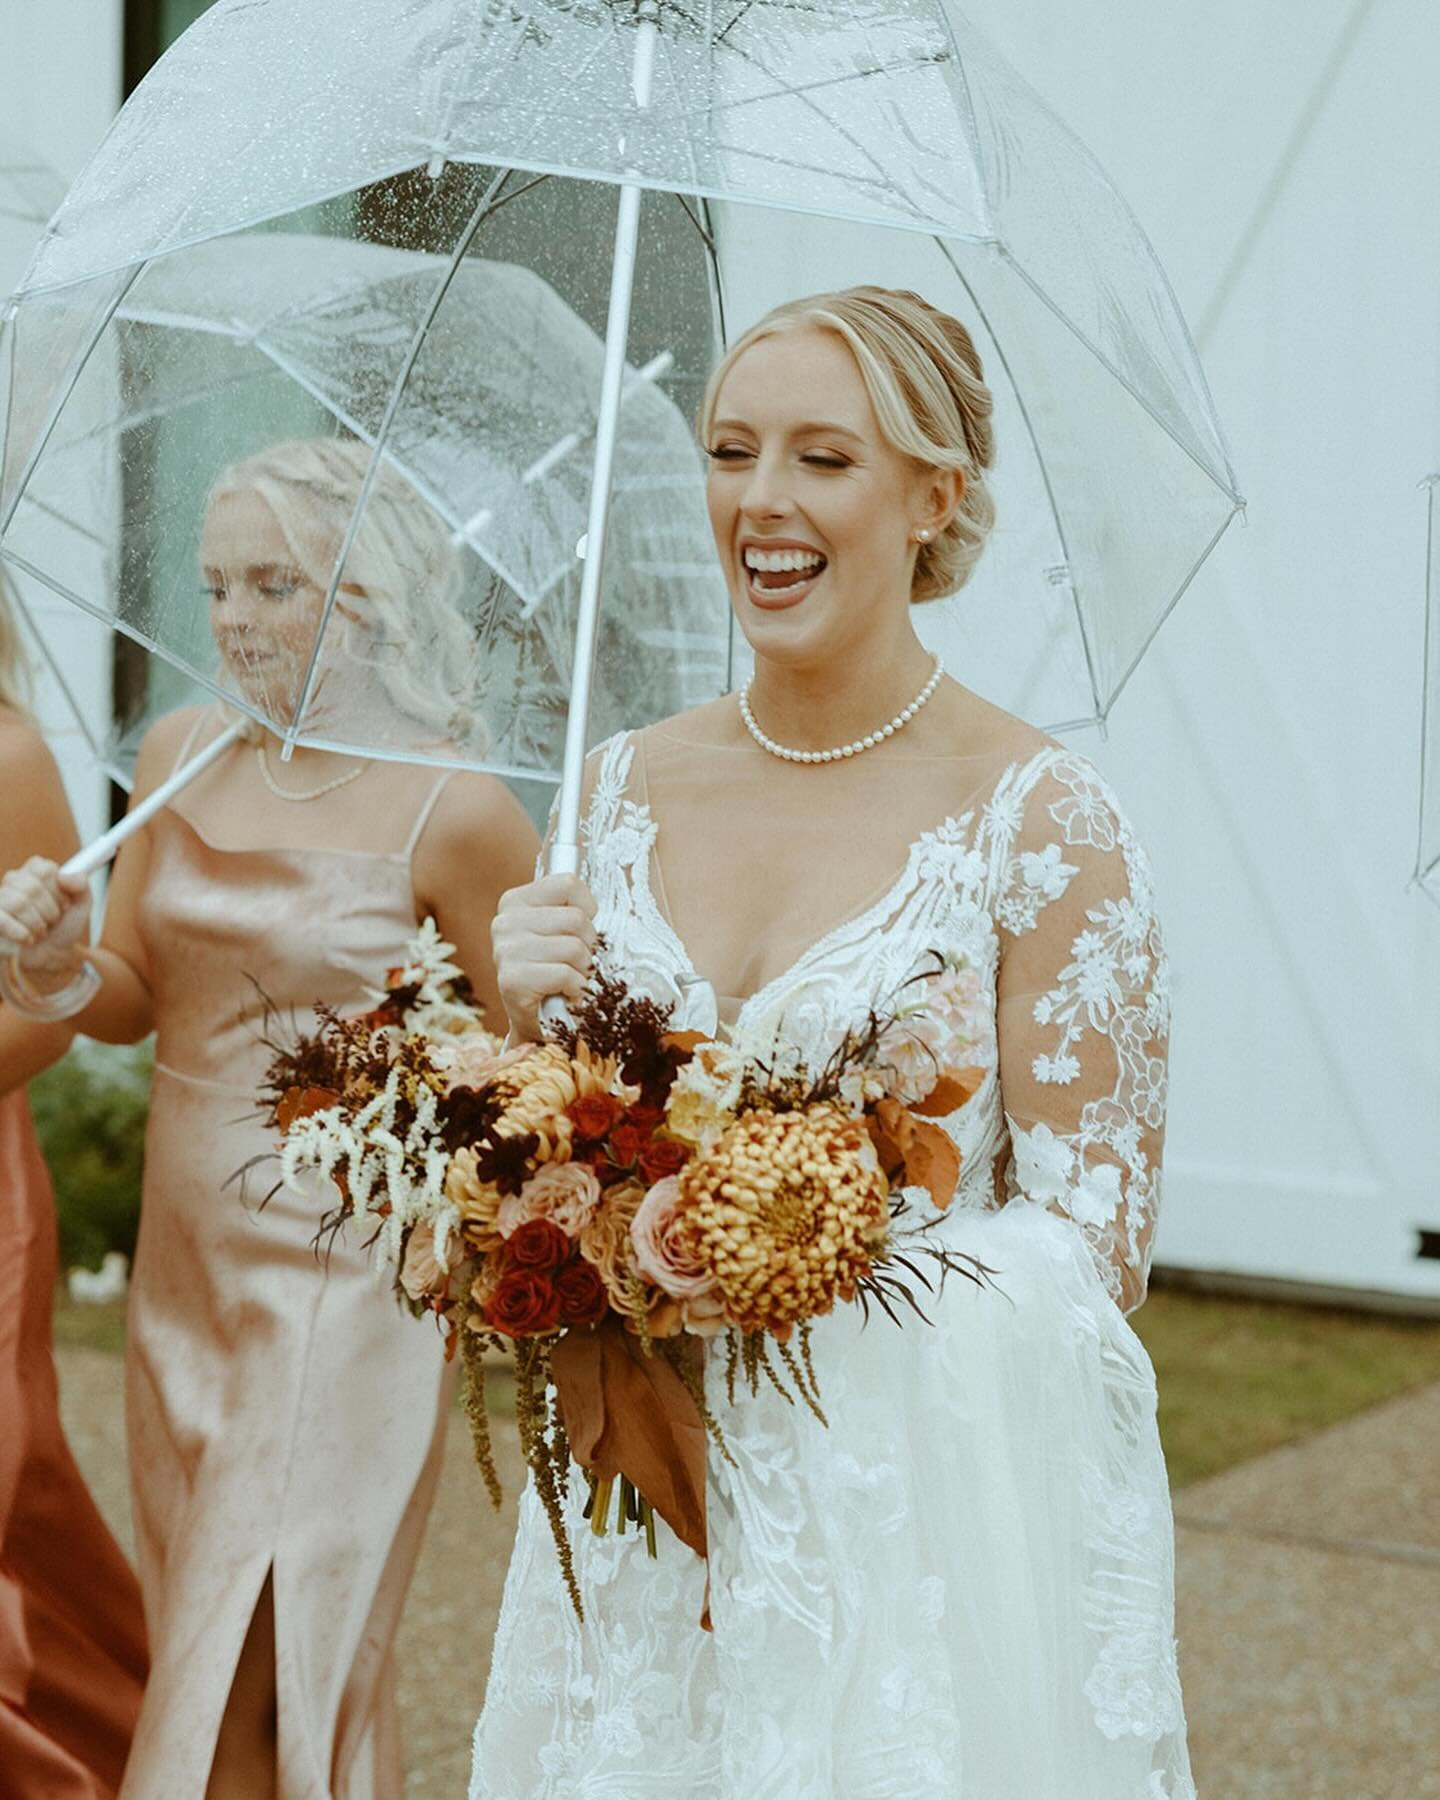 Felt like posting the cutest rainy wedding for this rainy day 🫶🏼☔️
Anyone else tired of this spring weather? I&rsquo;m ready for it to be goneeeee!

#dallaswedding #fortworthwedding #texaswedding #texasweddingplanner #dallasweddingplanner #fortwort